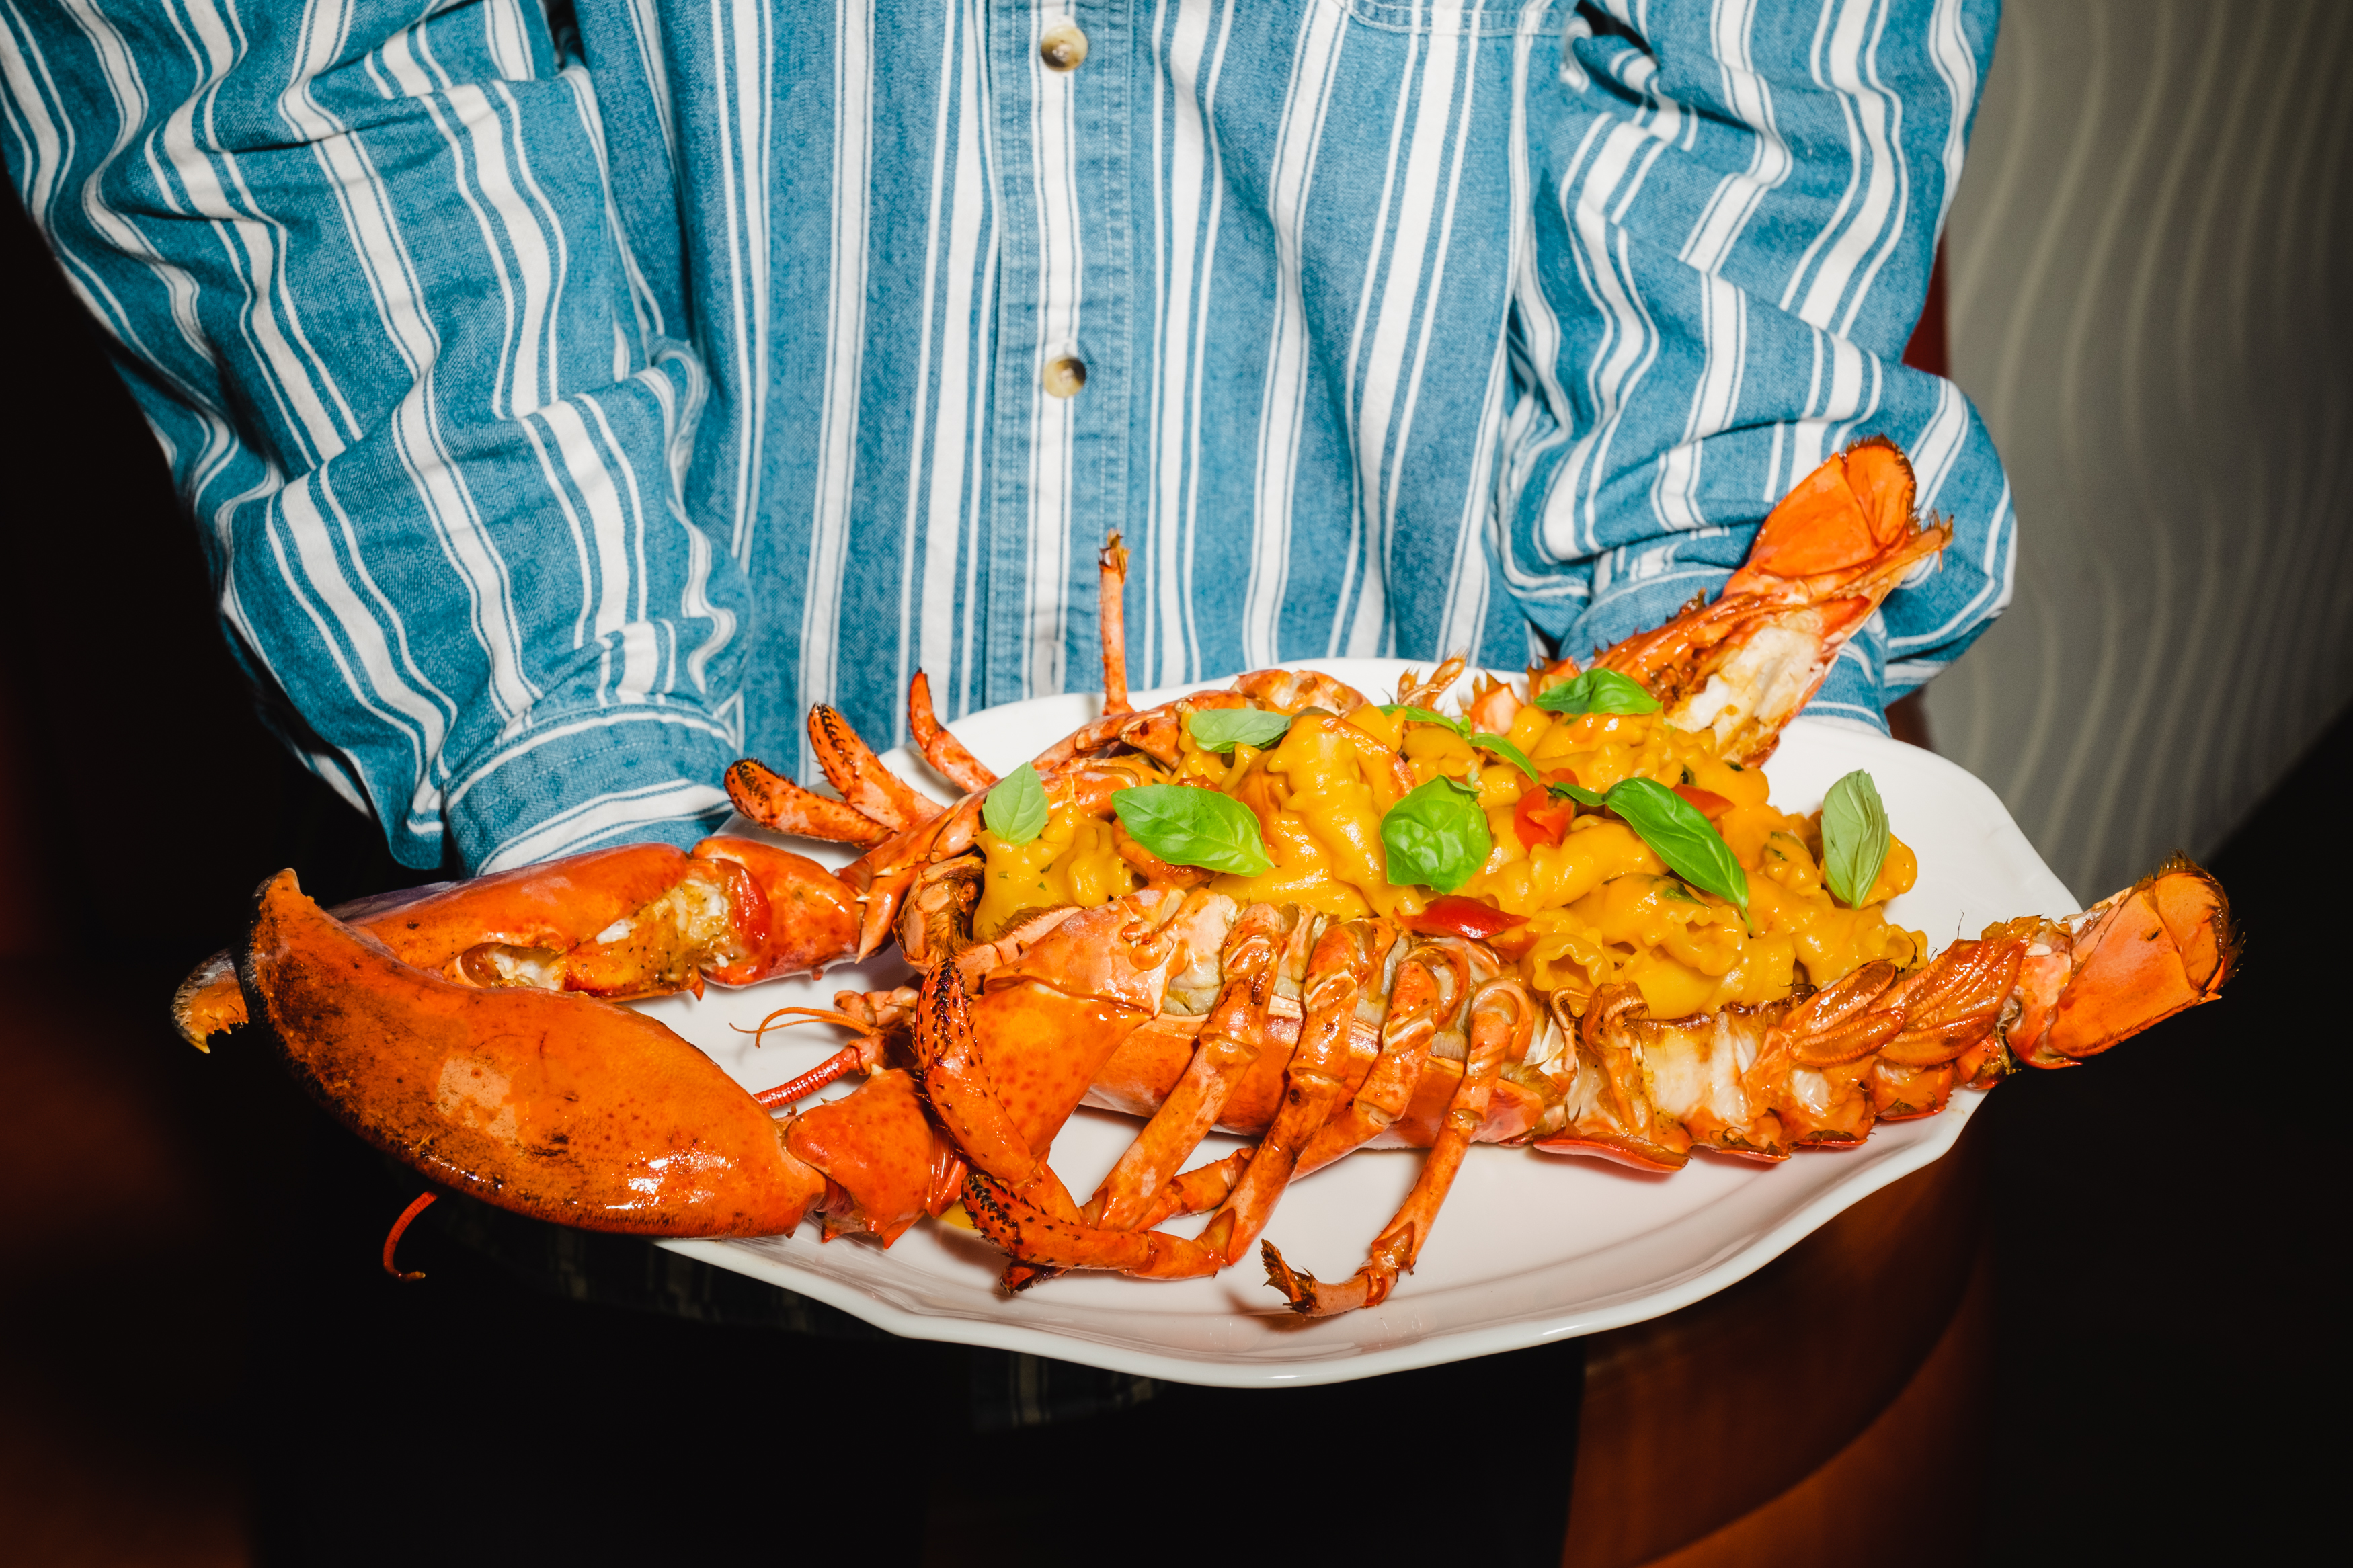 A whole lobster is arranged on a plate with a heap of basil leaves and orange-colored pasta.